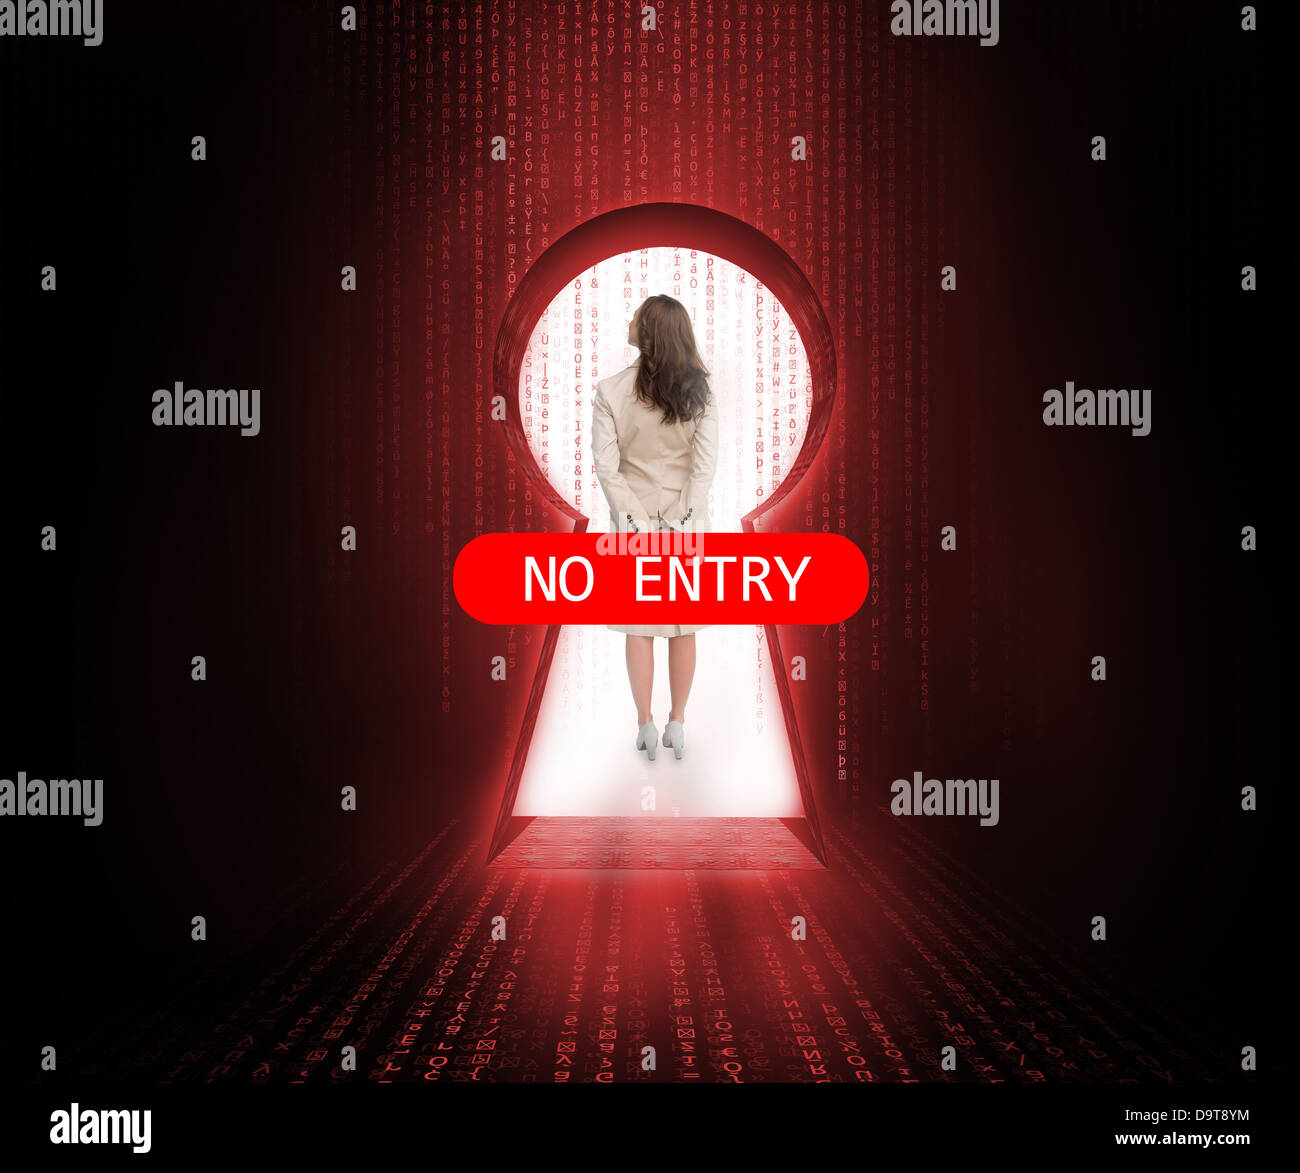 Doorway blocked by no entry sign with businesswoman Stock Photo